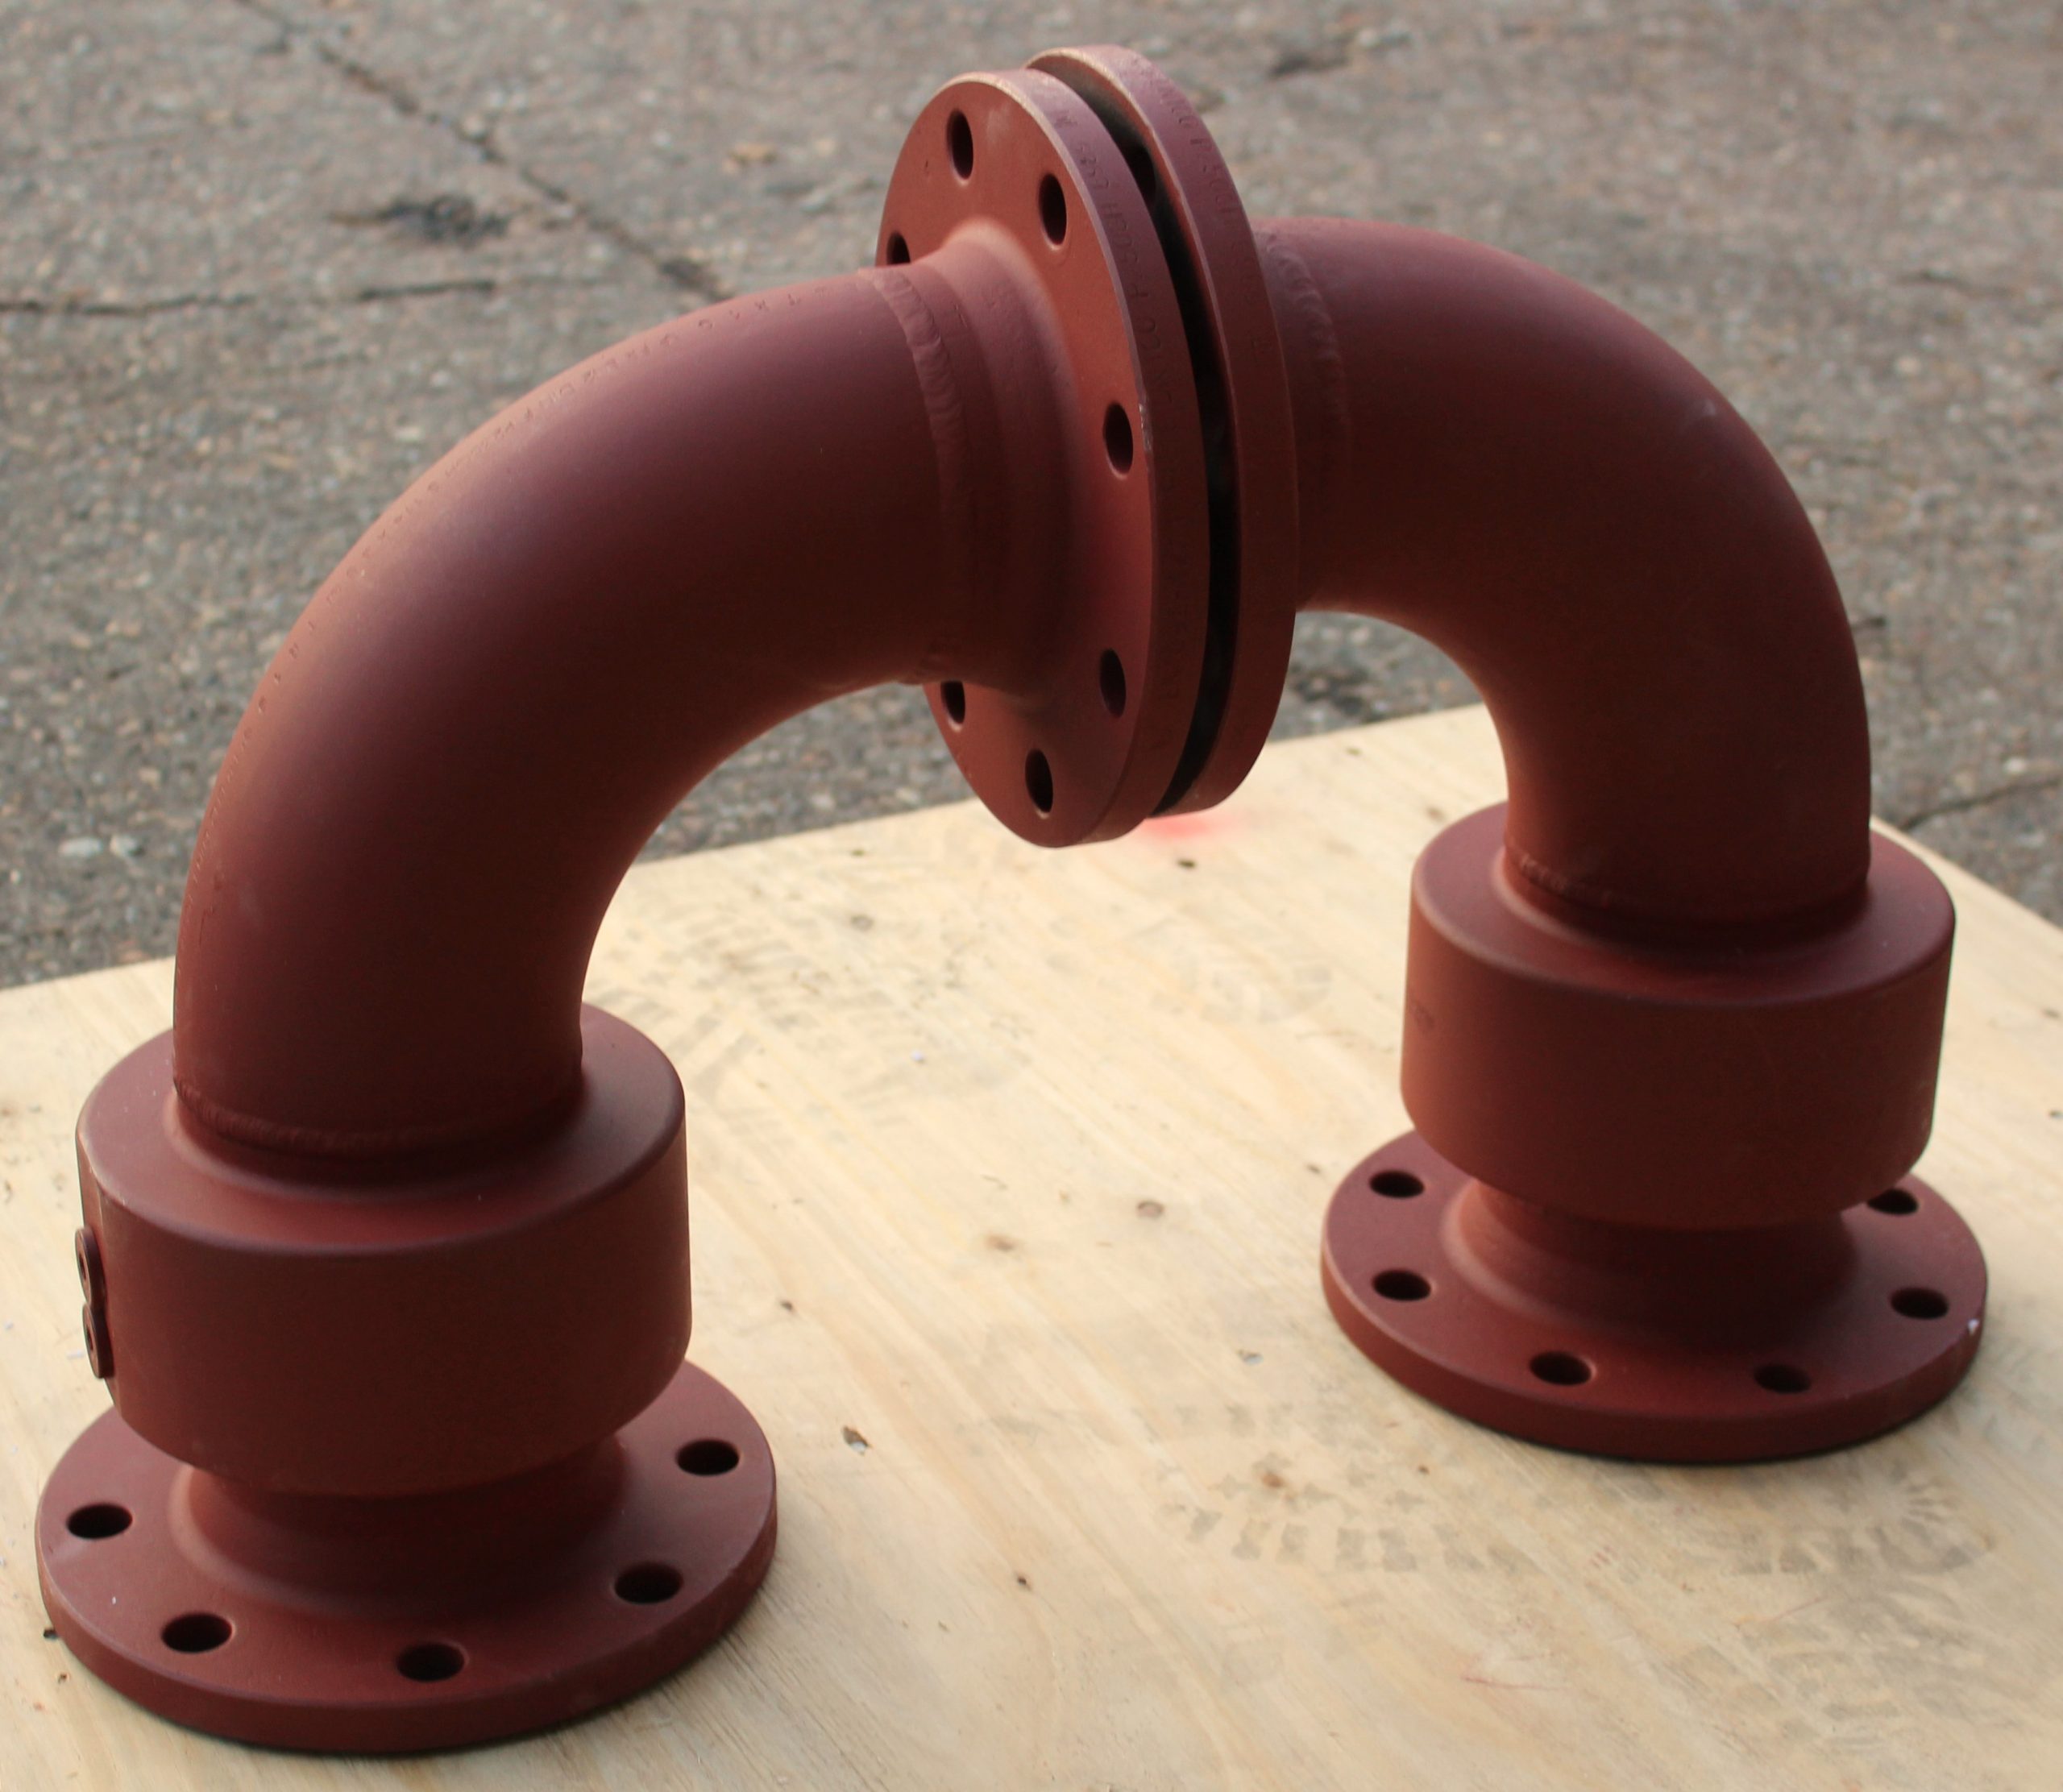 Are you looking for a new Swivel supplier?